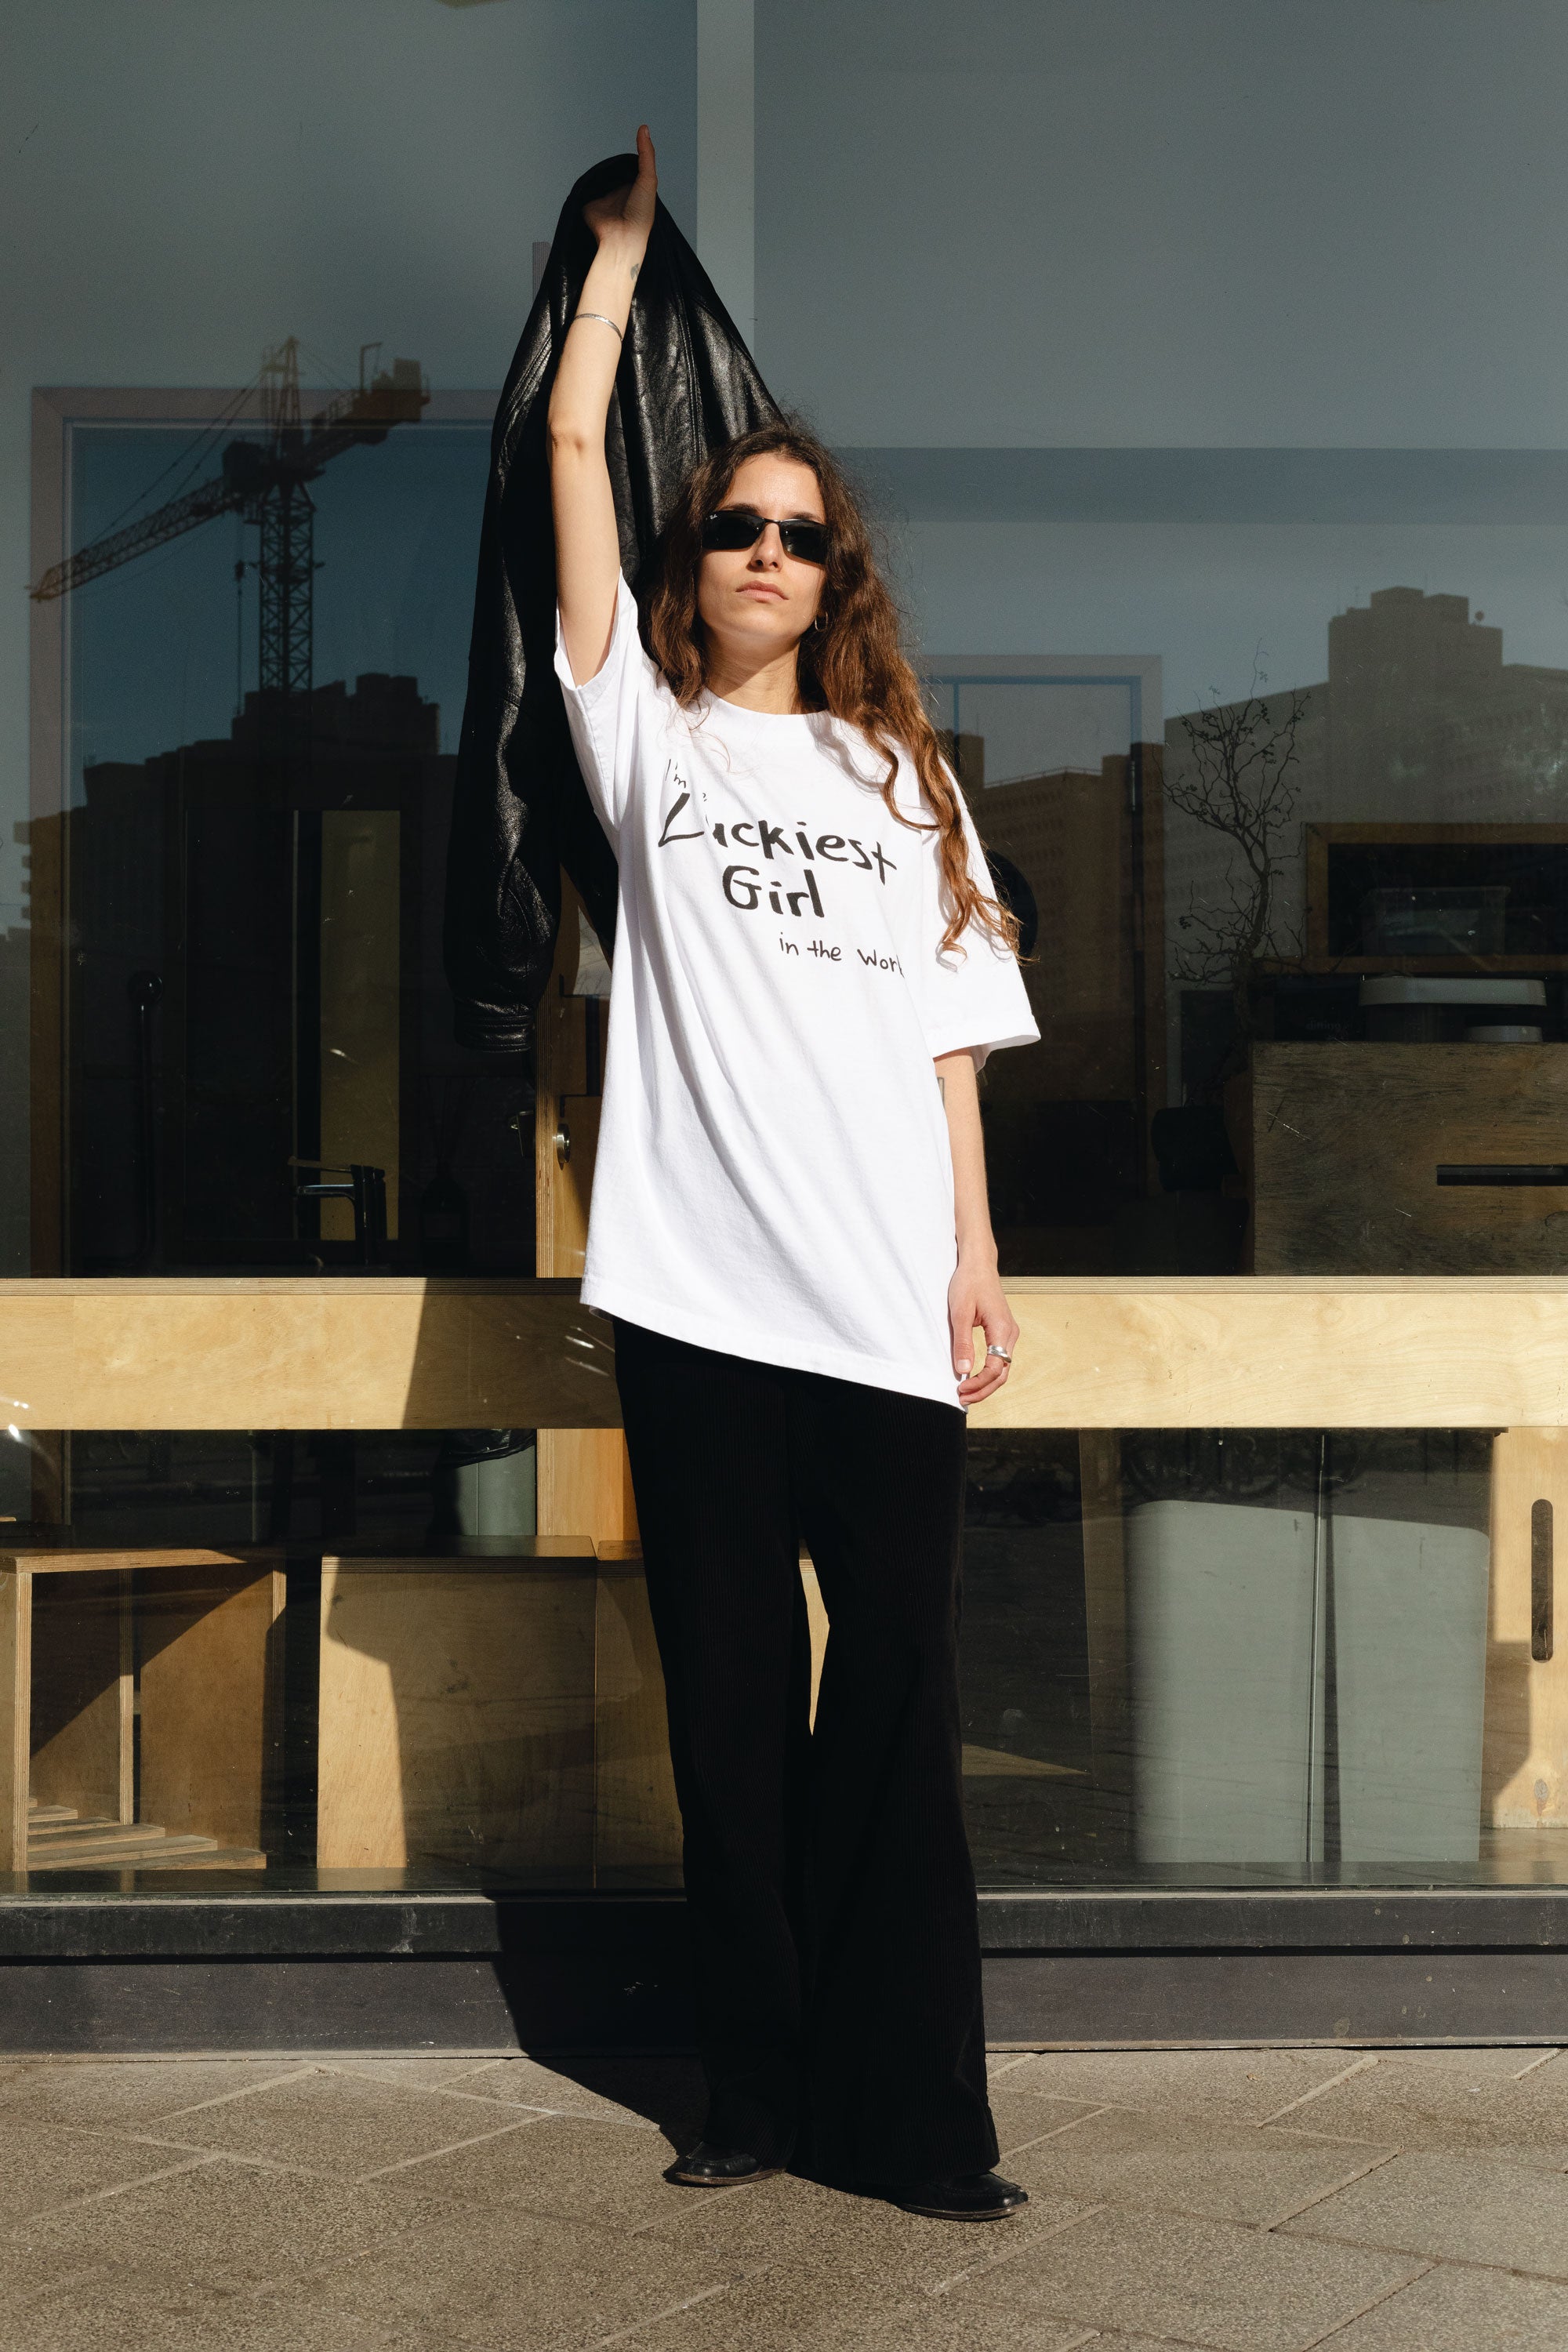 DABUSH LUCKY GIRL T-SHIRT. 100% Cotton, oversized tee with Back and front print. Made in Tel aviv. Shop and view the latest Drops from the official DABUSH website. Worldwide Shipping. DABUSH is a publishing house, design studio and a brand based in Tel Aviv, Israel.